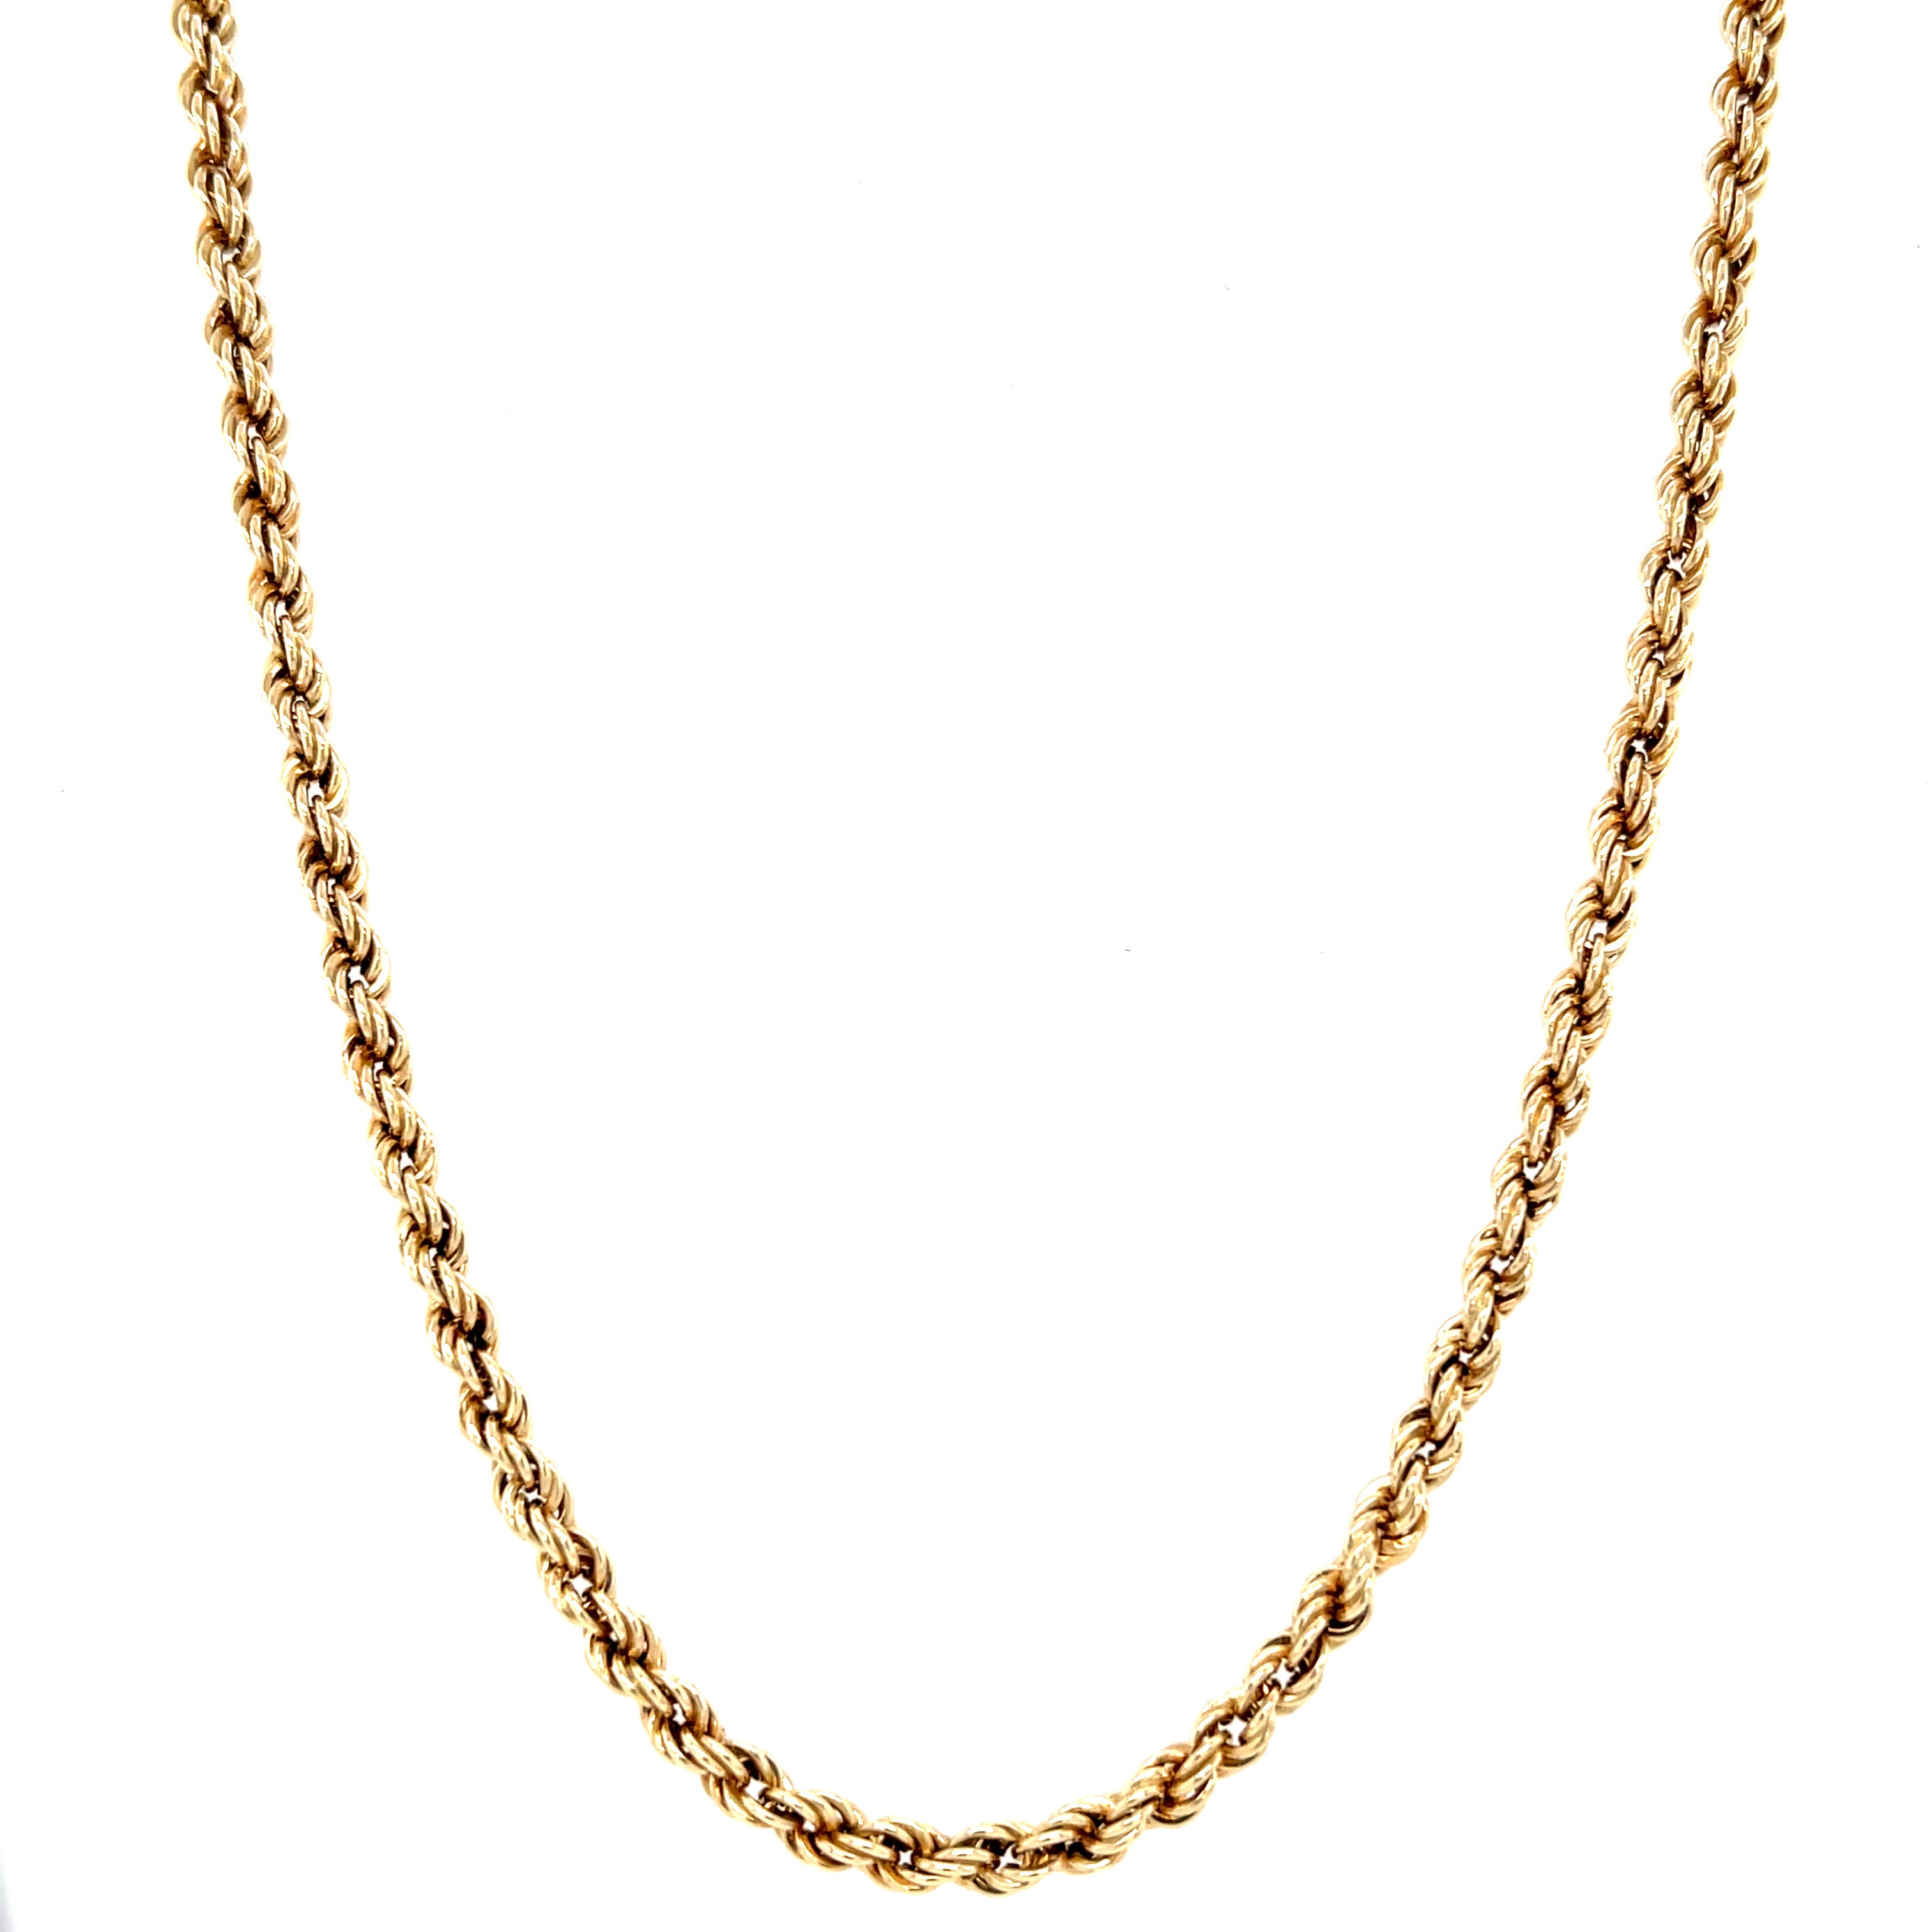 9ct Yellow Gold Hollow 18" Rope Chain - 5.38g SOLD